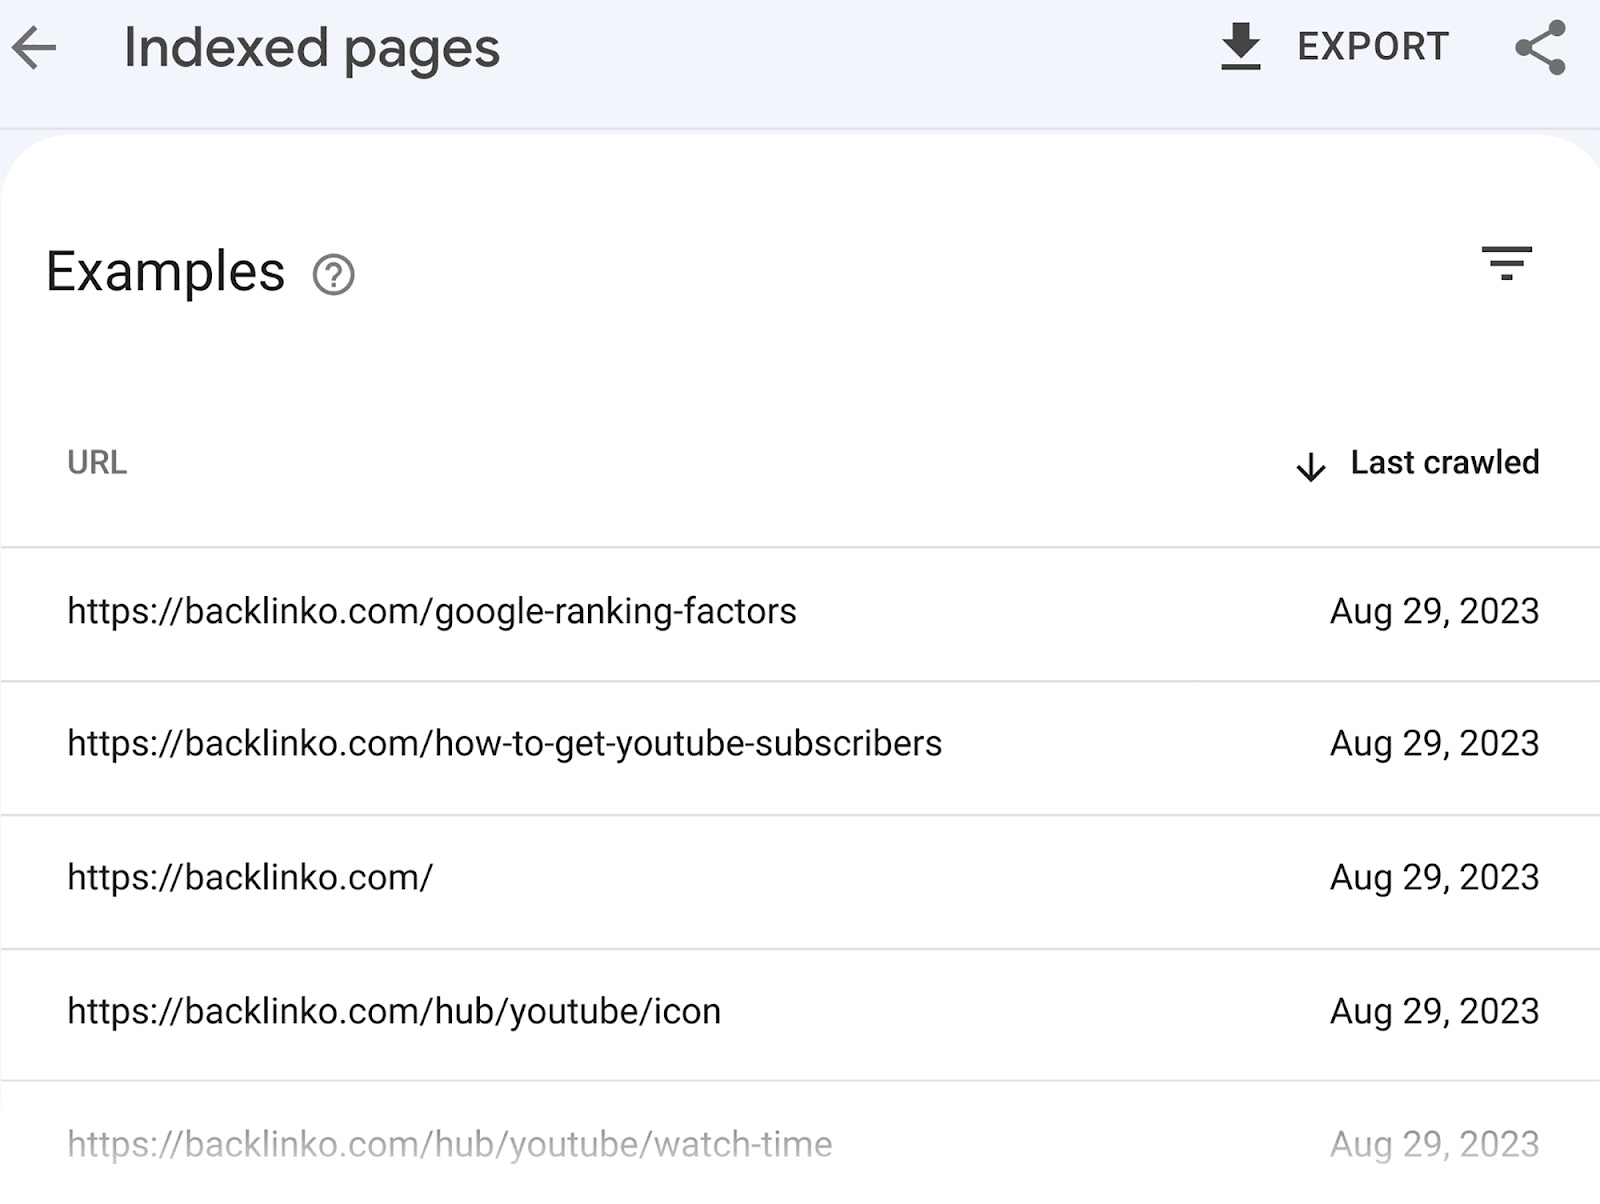 Indexed Pages showing last crawled on GSC